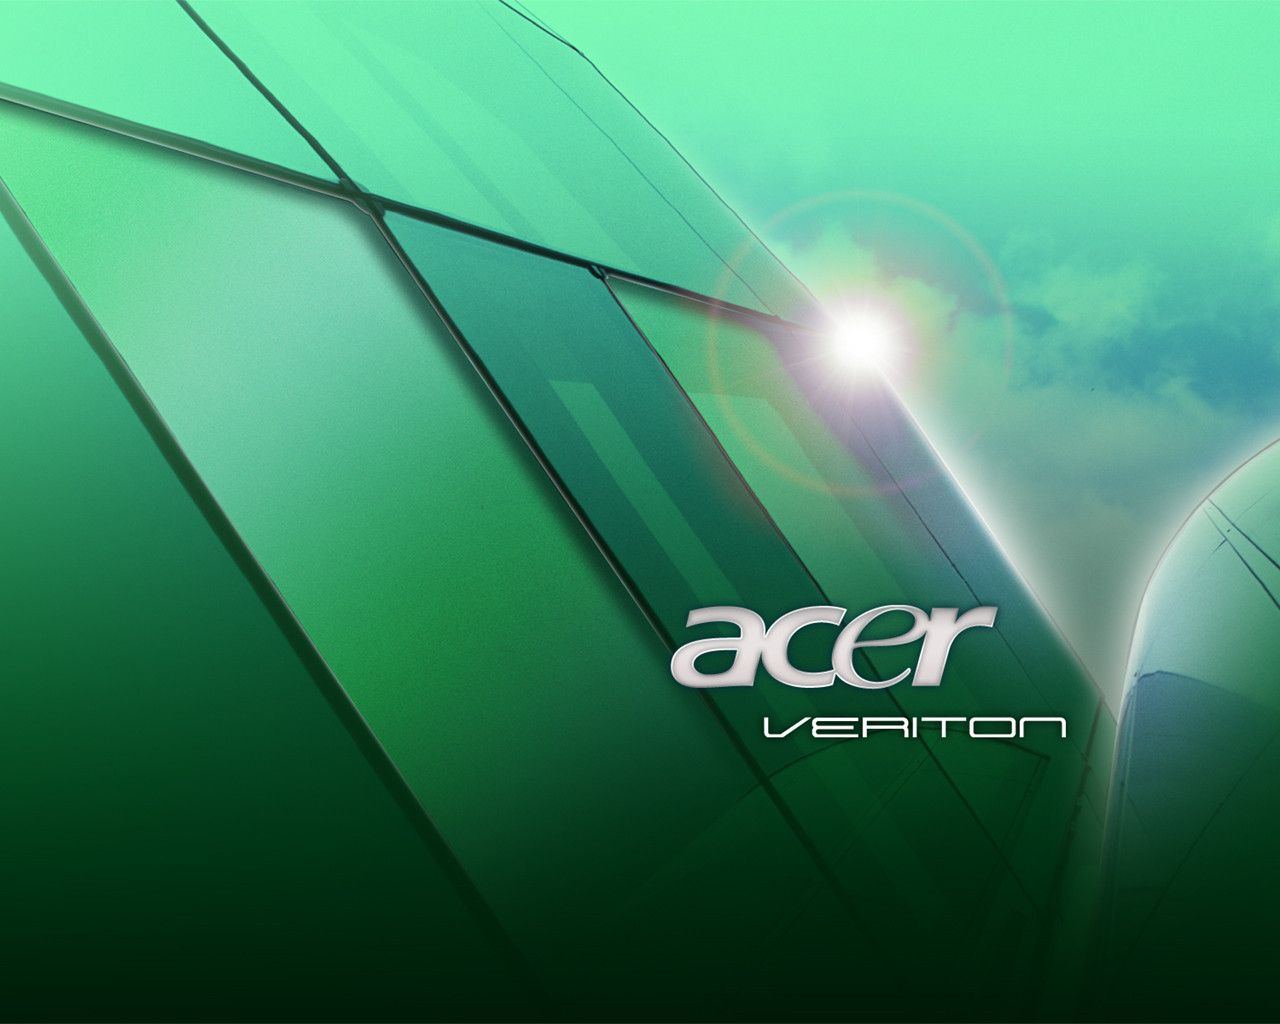 Acer computers logo